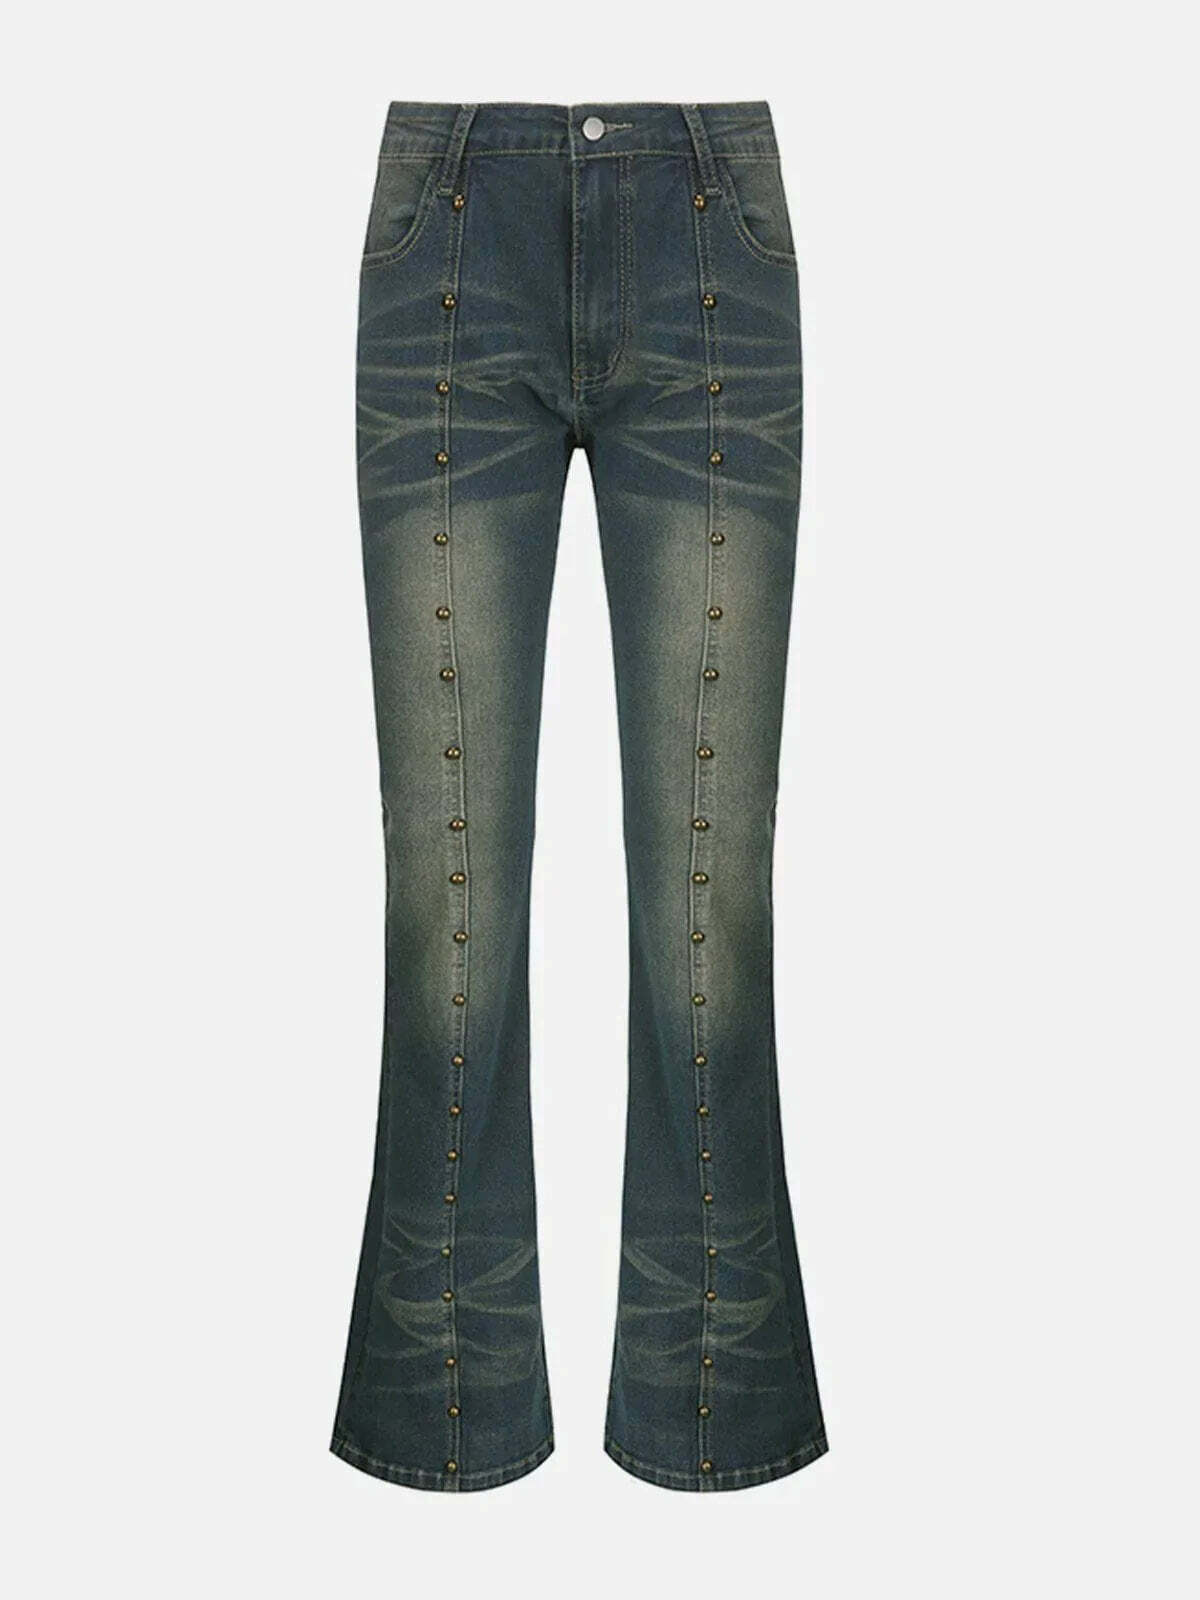 studded vintage wash jeans edgy streetwear essential 5688